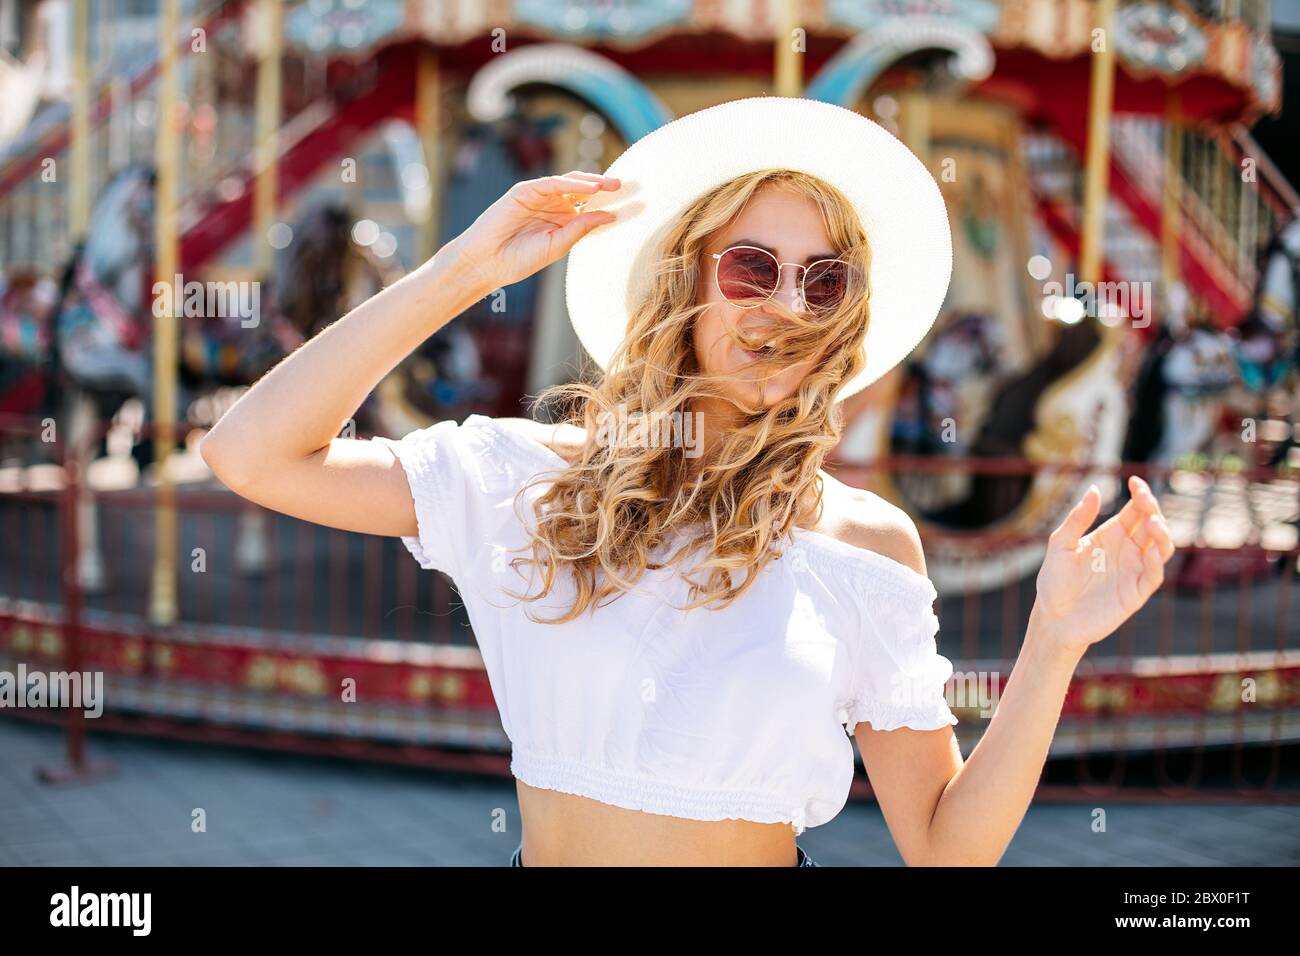 happy smiling pretty girl having fun.stylishly dressed in short denim shorts and t-shirts, sunglasses.posing on the background of a ferris wheel. Stock Photo